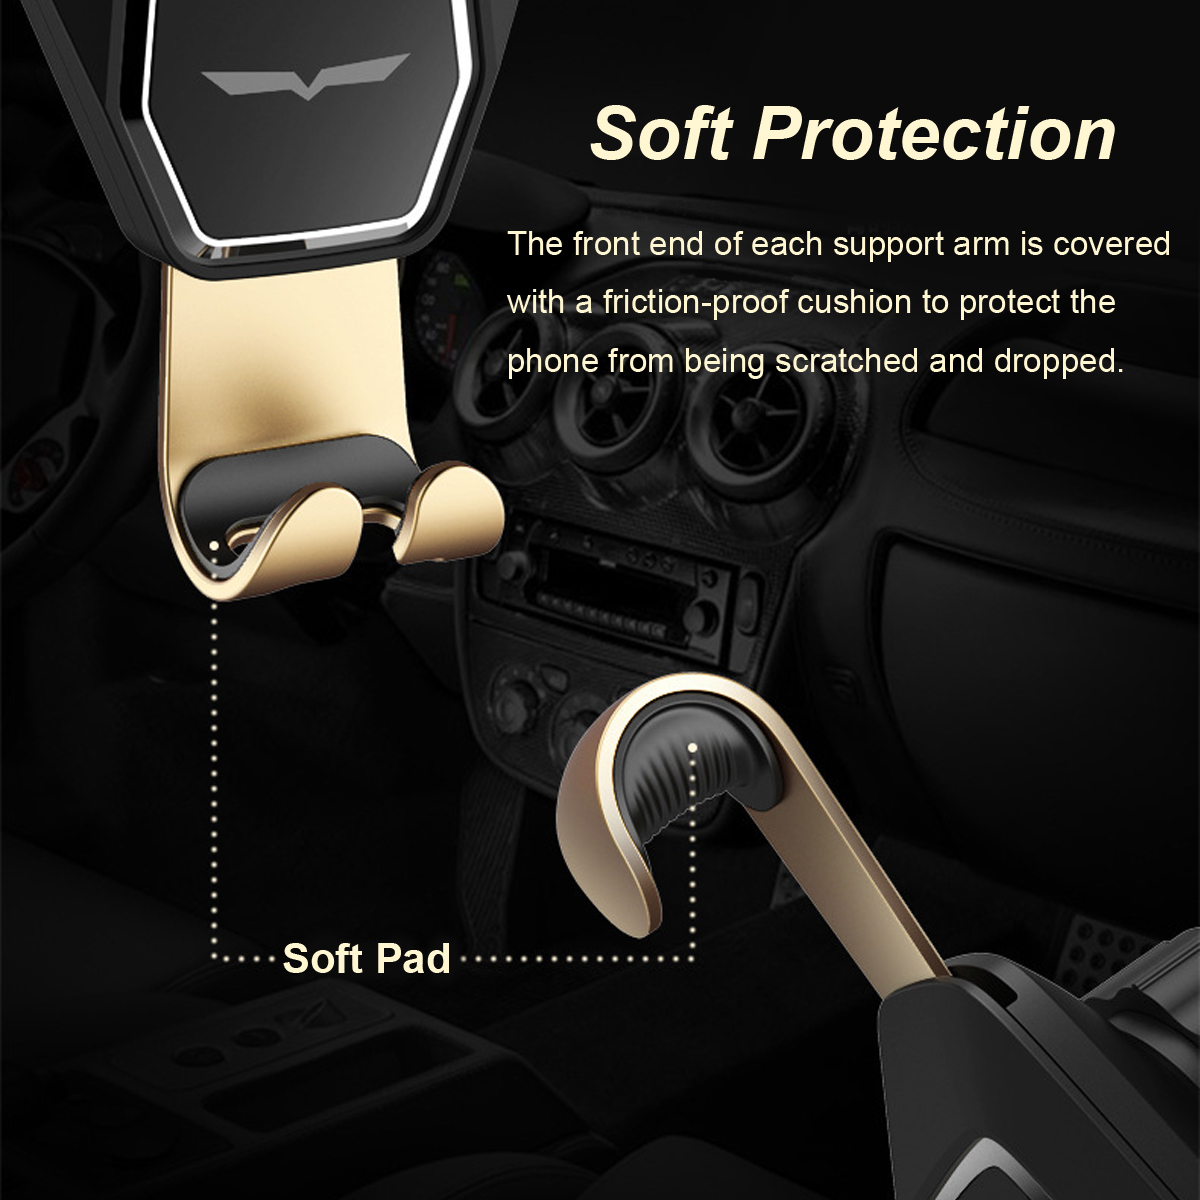 360 Degree Rotation Metal Gravity Auto Lock Holder Car Air Vent Mount Phone Stand Outlet Bracket